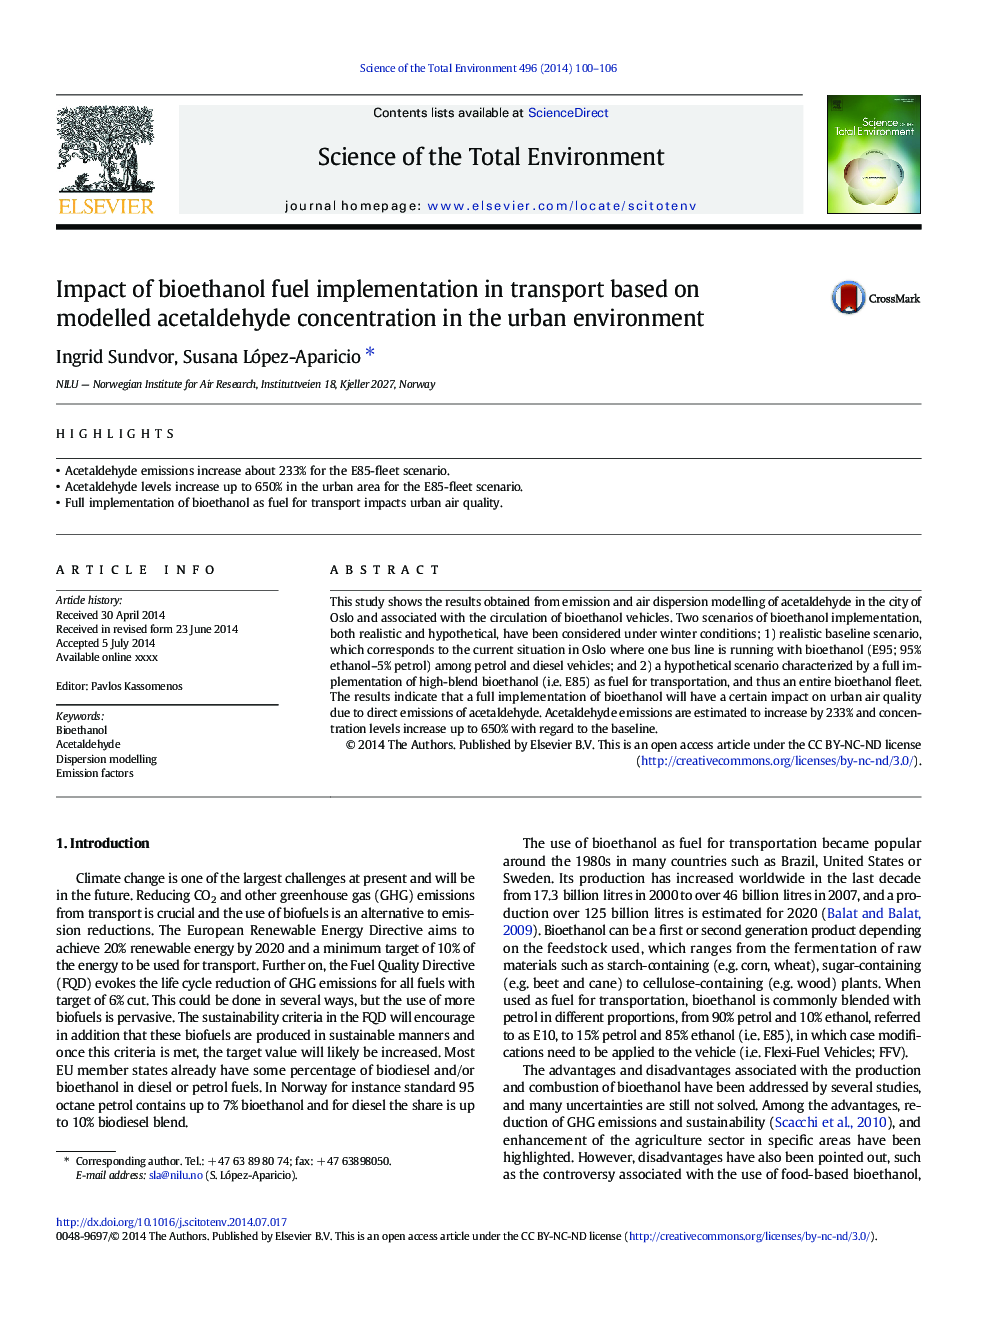 Impact of bioethanol fuel implementation in transport based on modelled acetaldehyde concentration in the urban environment